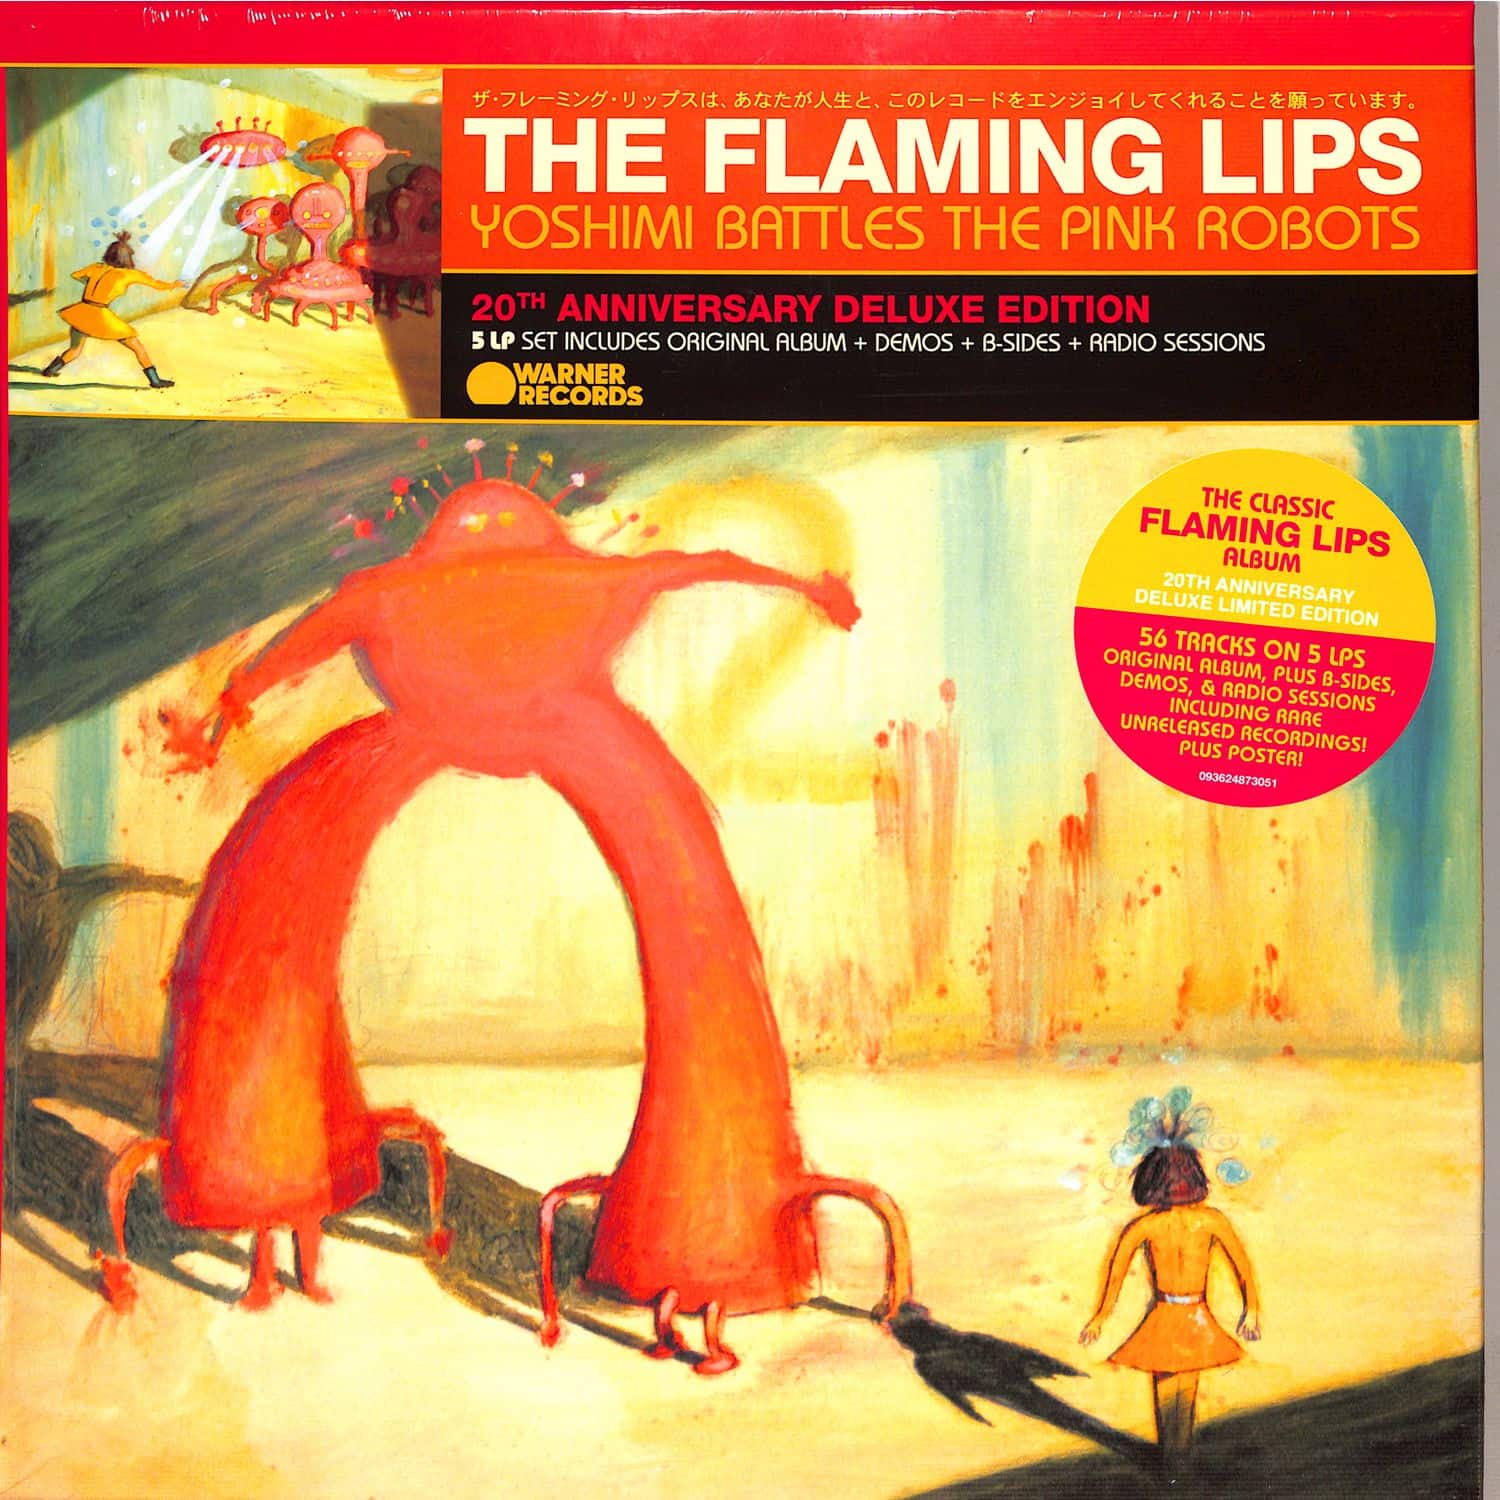 The Flaming Lips - YOSHIMI BATTLES THE PINK ROBOTS 